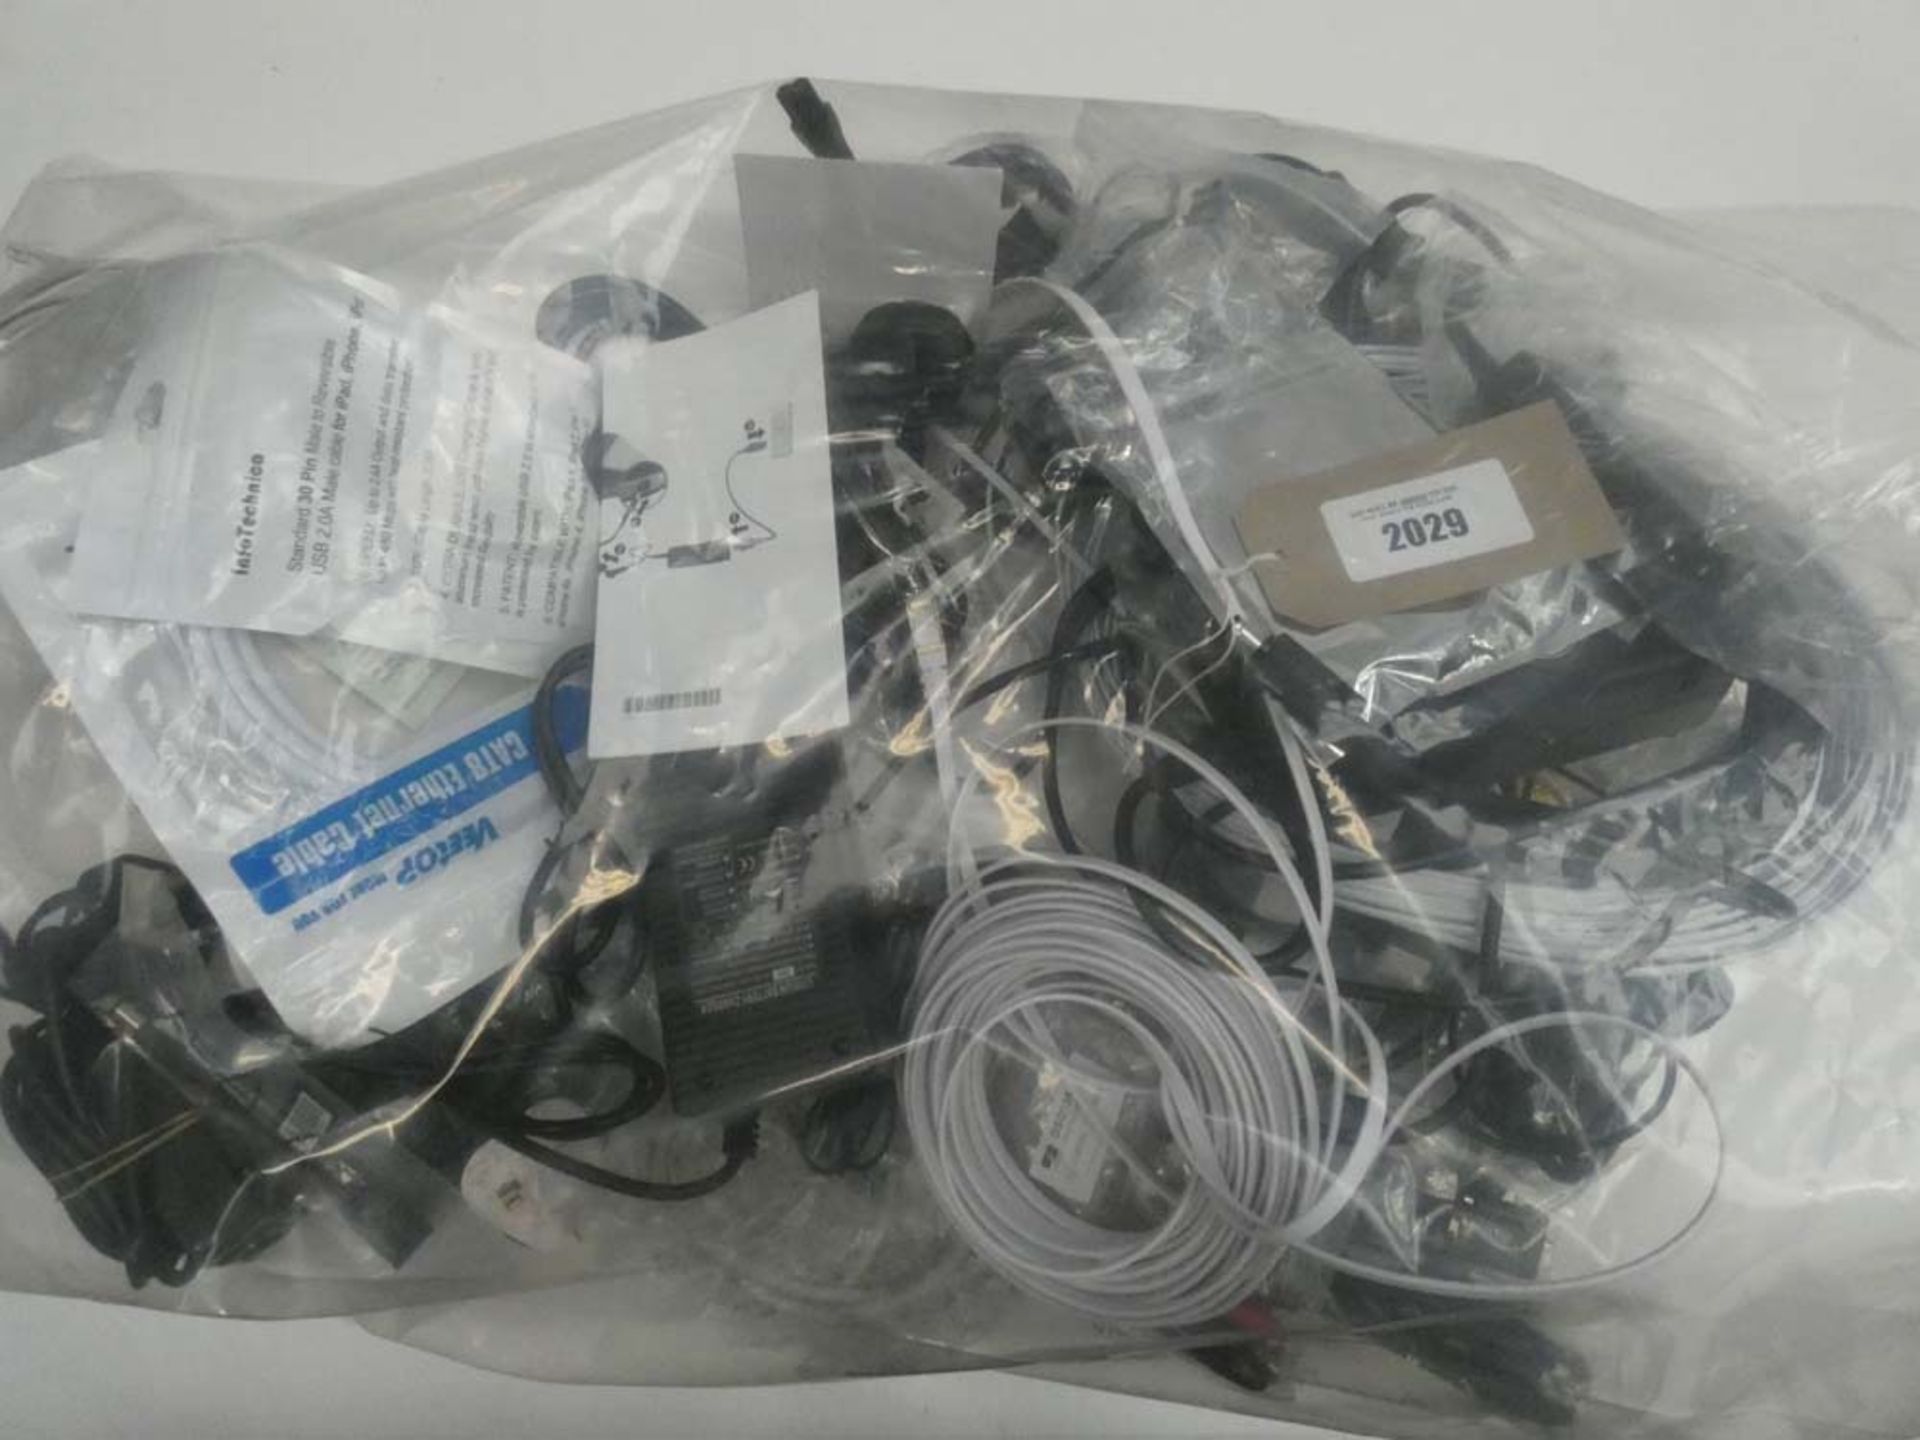 Bag containing various cables, leads and PSUs